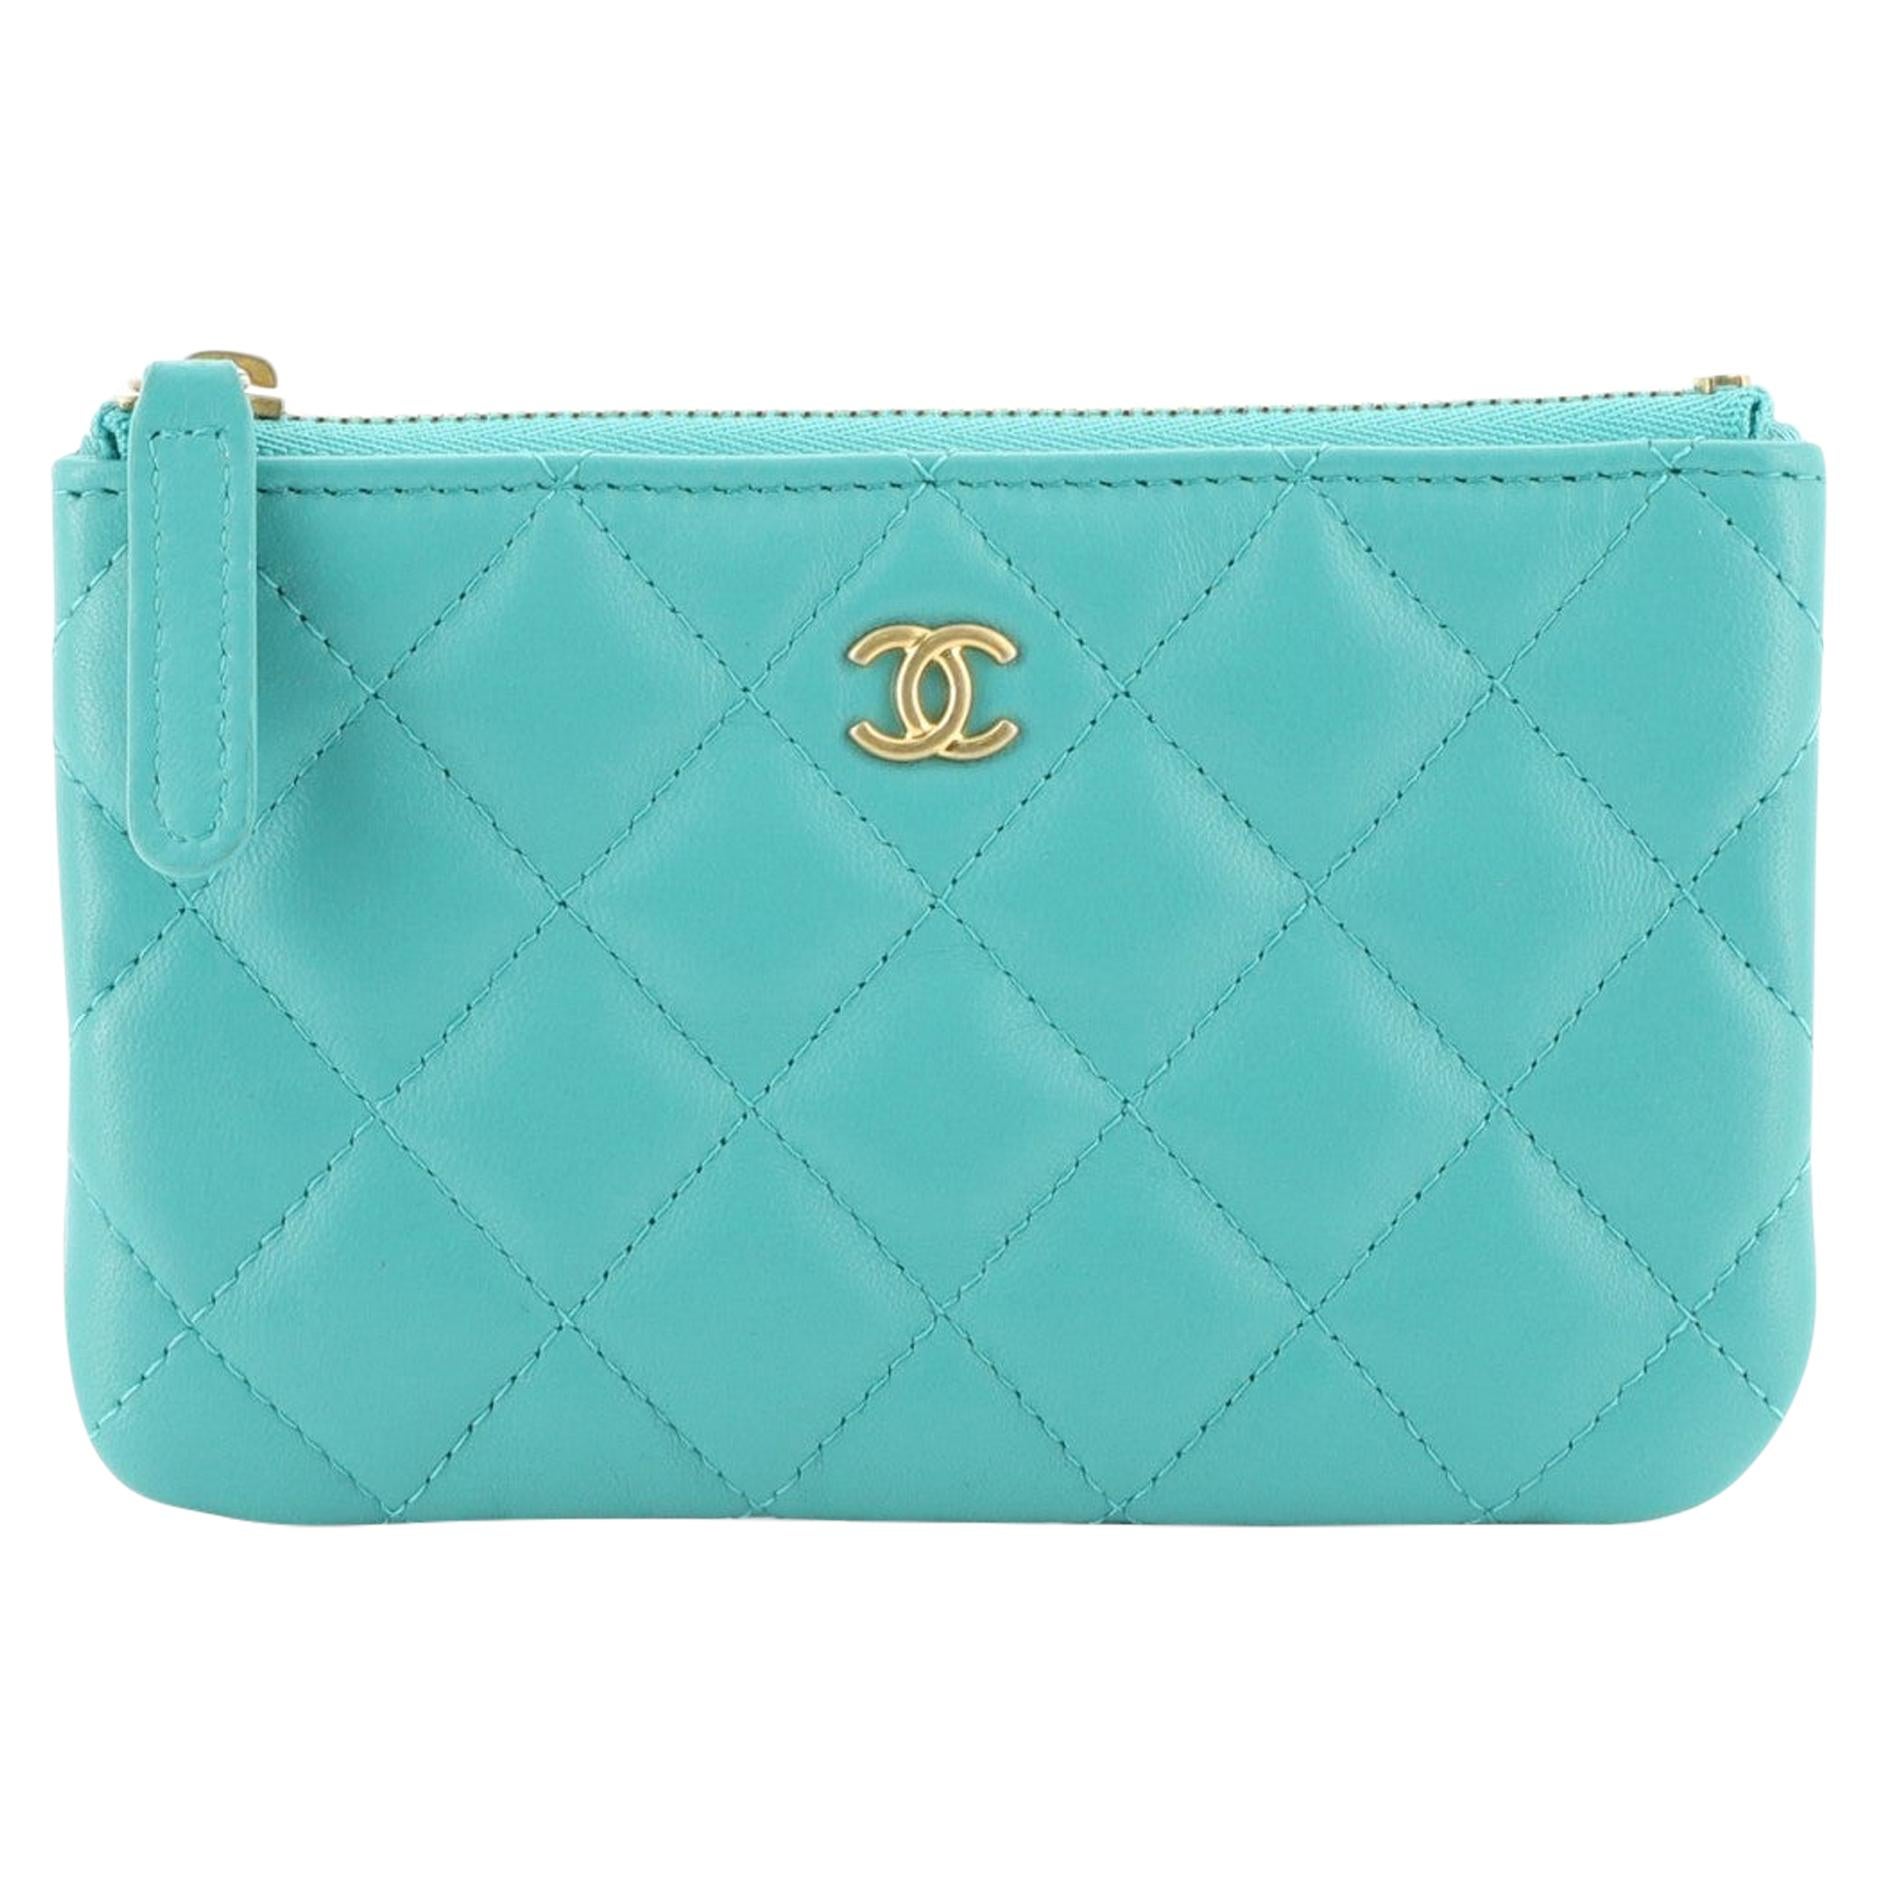 Chanel Classic O Case Pouch Quilted Lambskin Mini